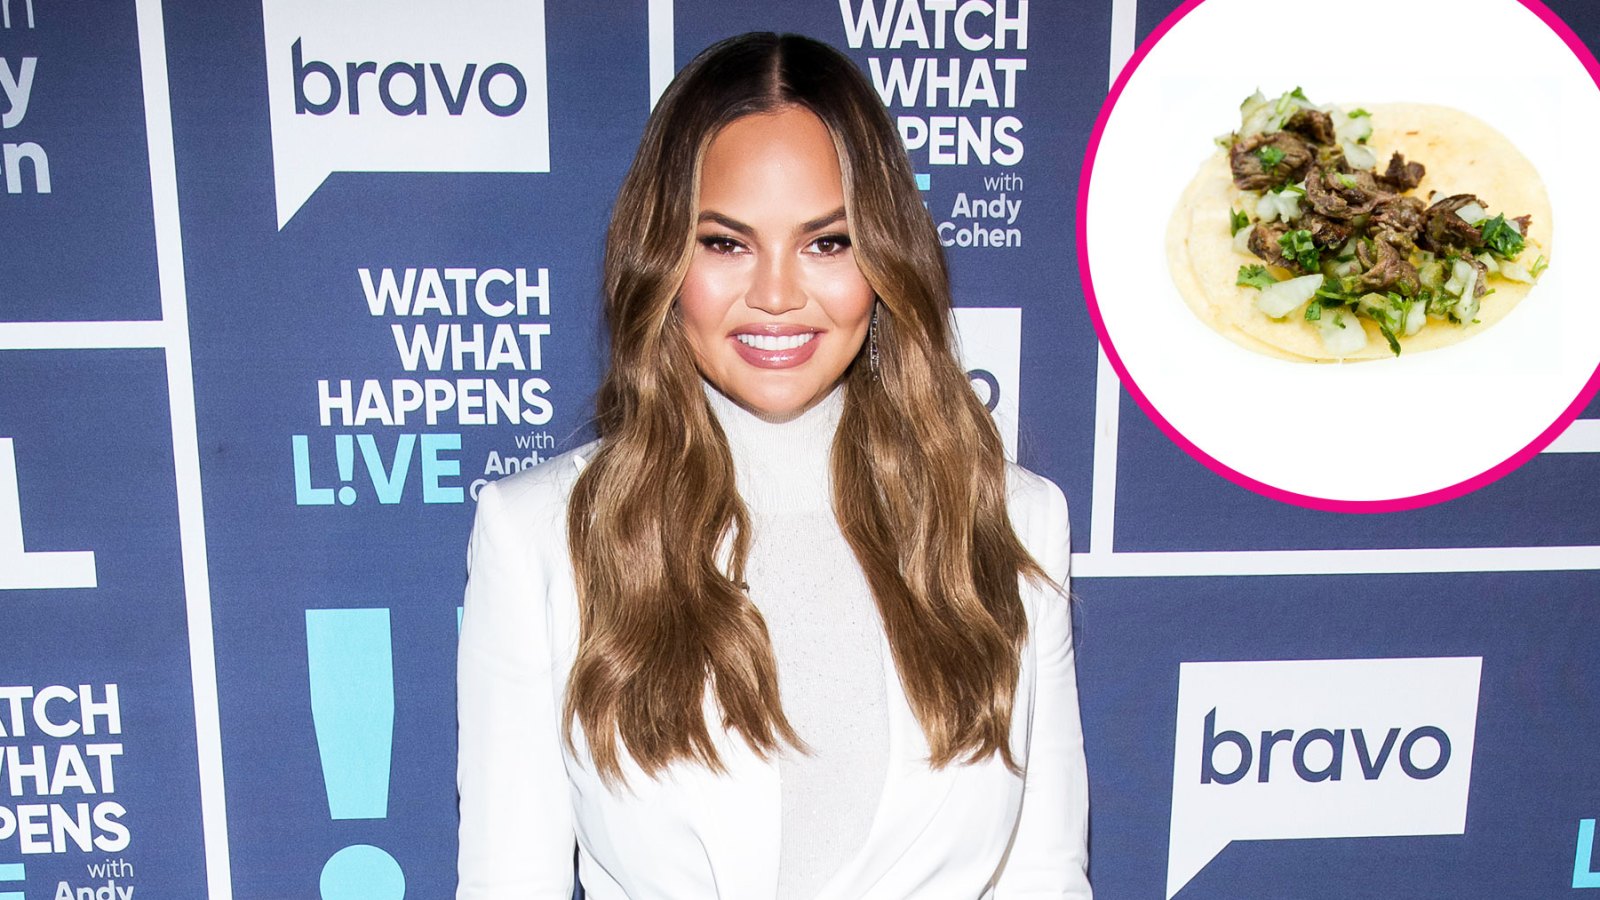 Chrissy Teigen Suggests Genius Delivery Hack for Taco Bell That Would Prevent ‘Soggy’ Meals